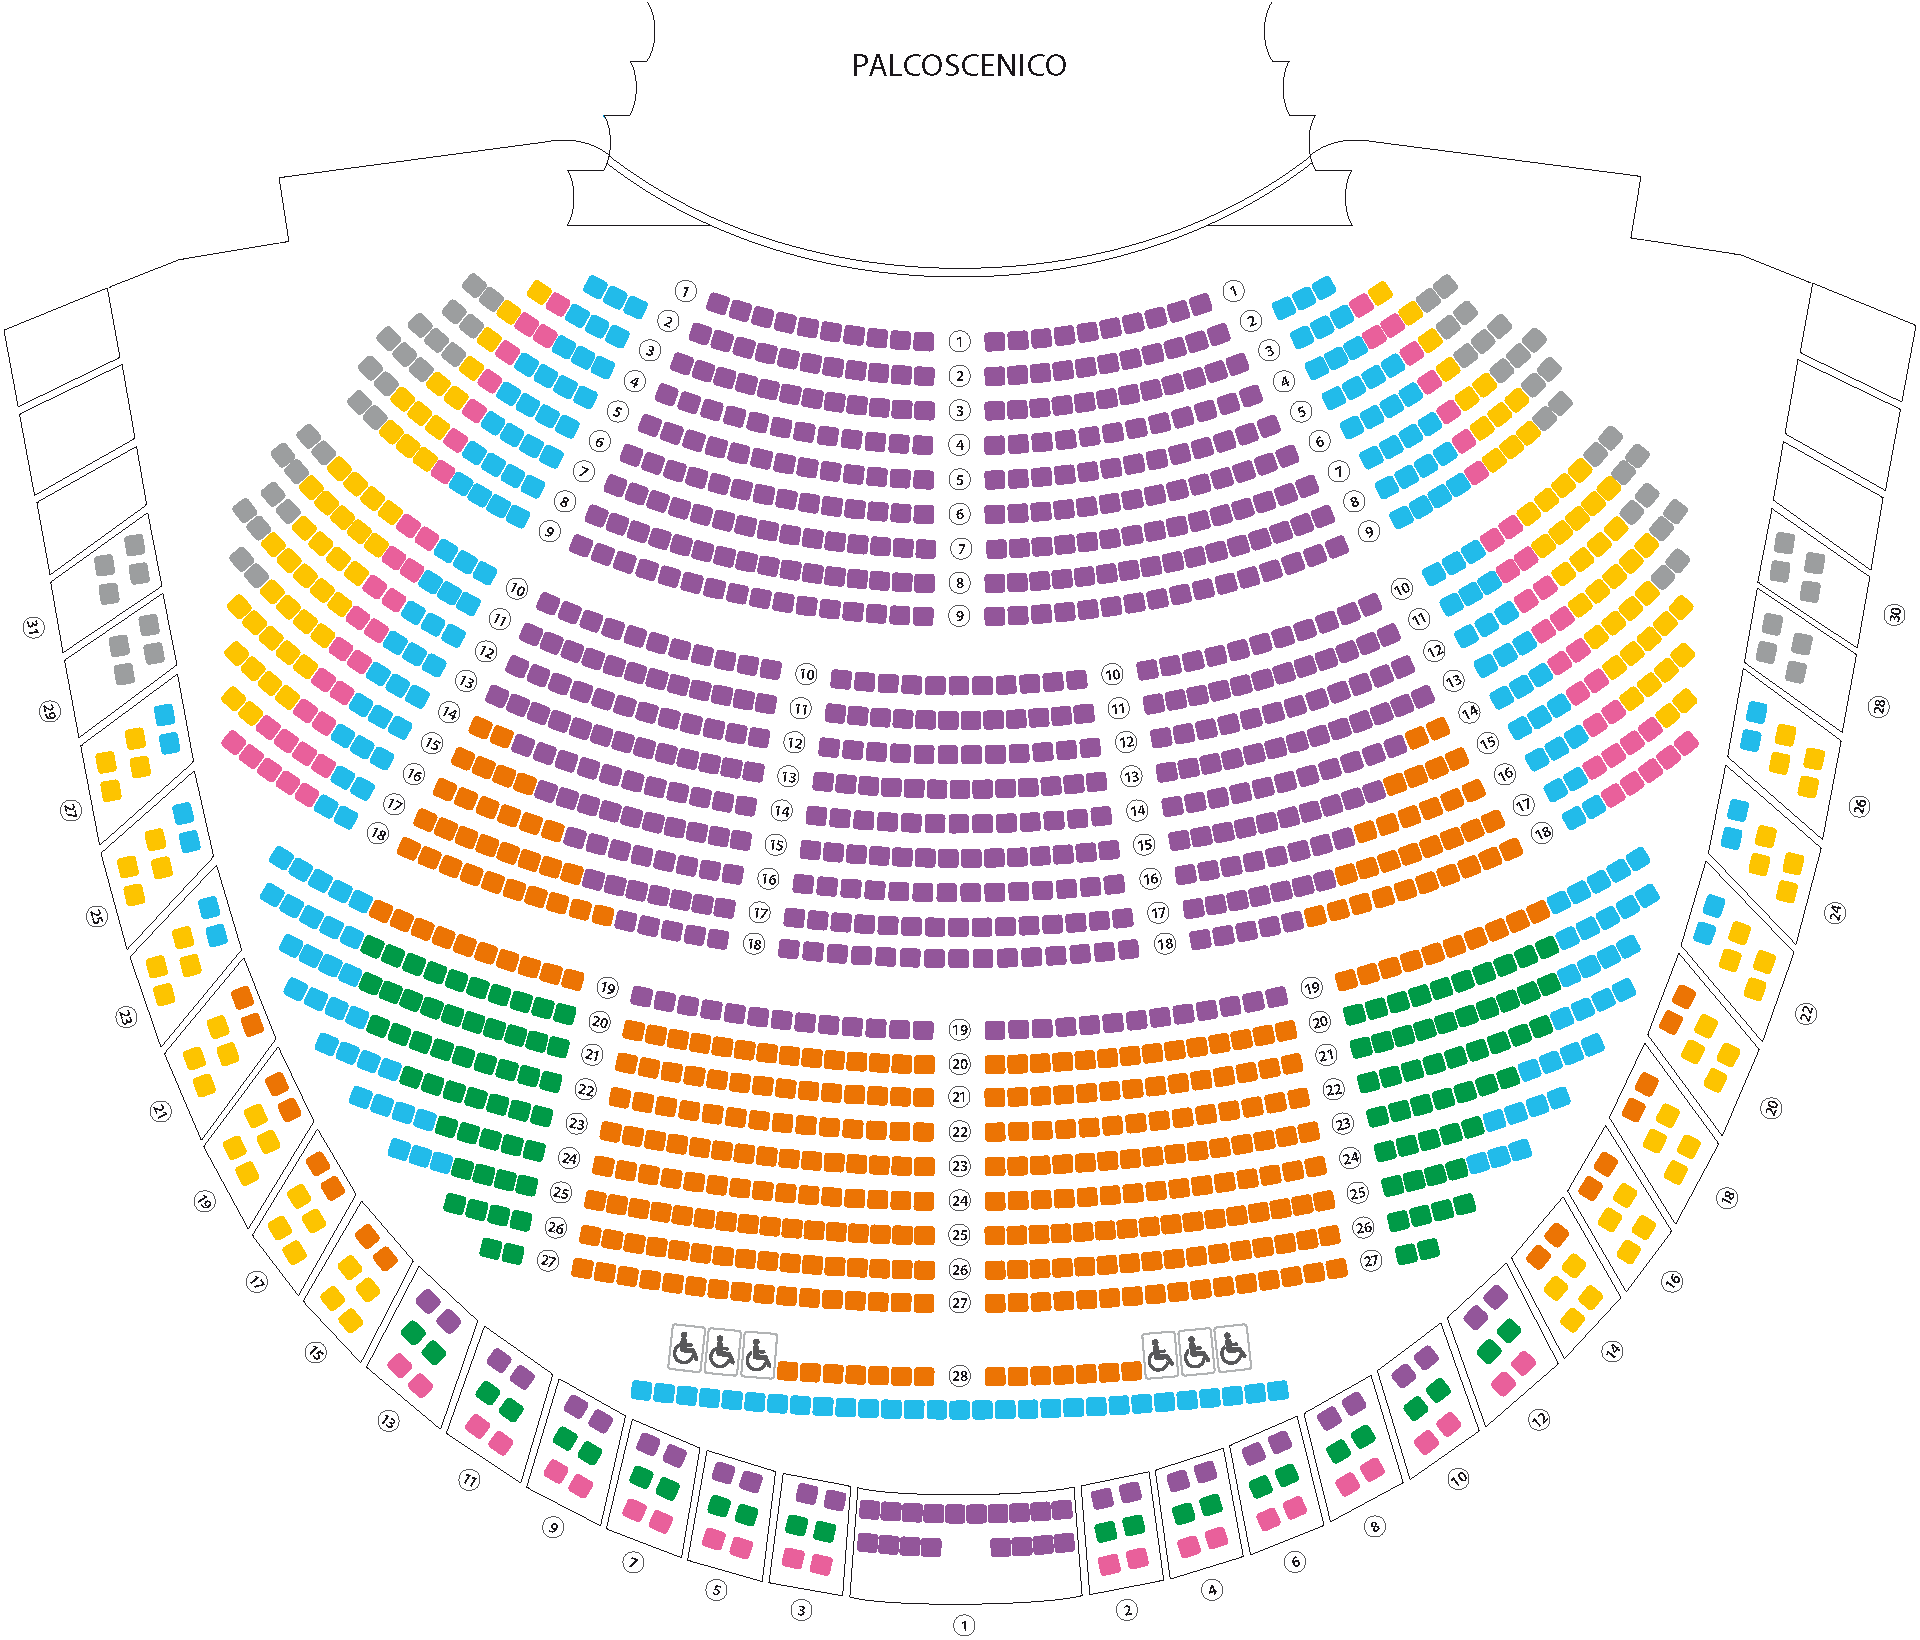 Floorplan for performances of Roberto Bolle and Friends